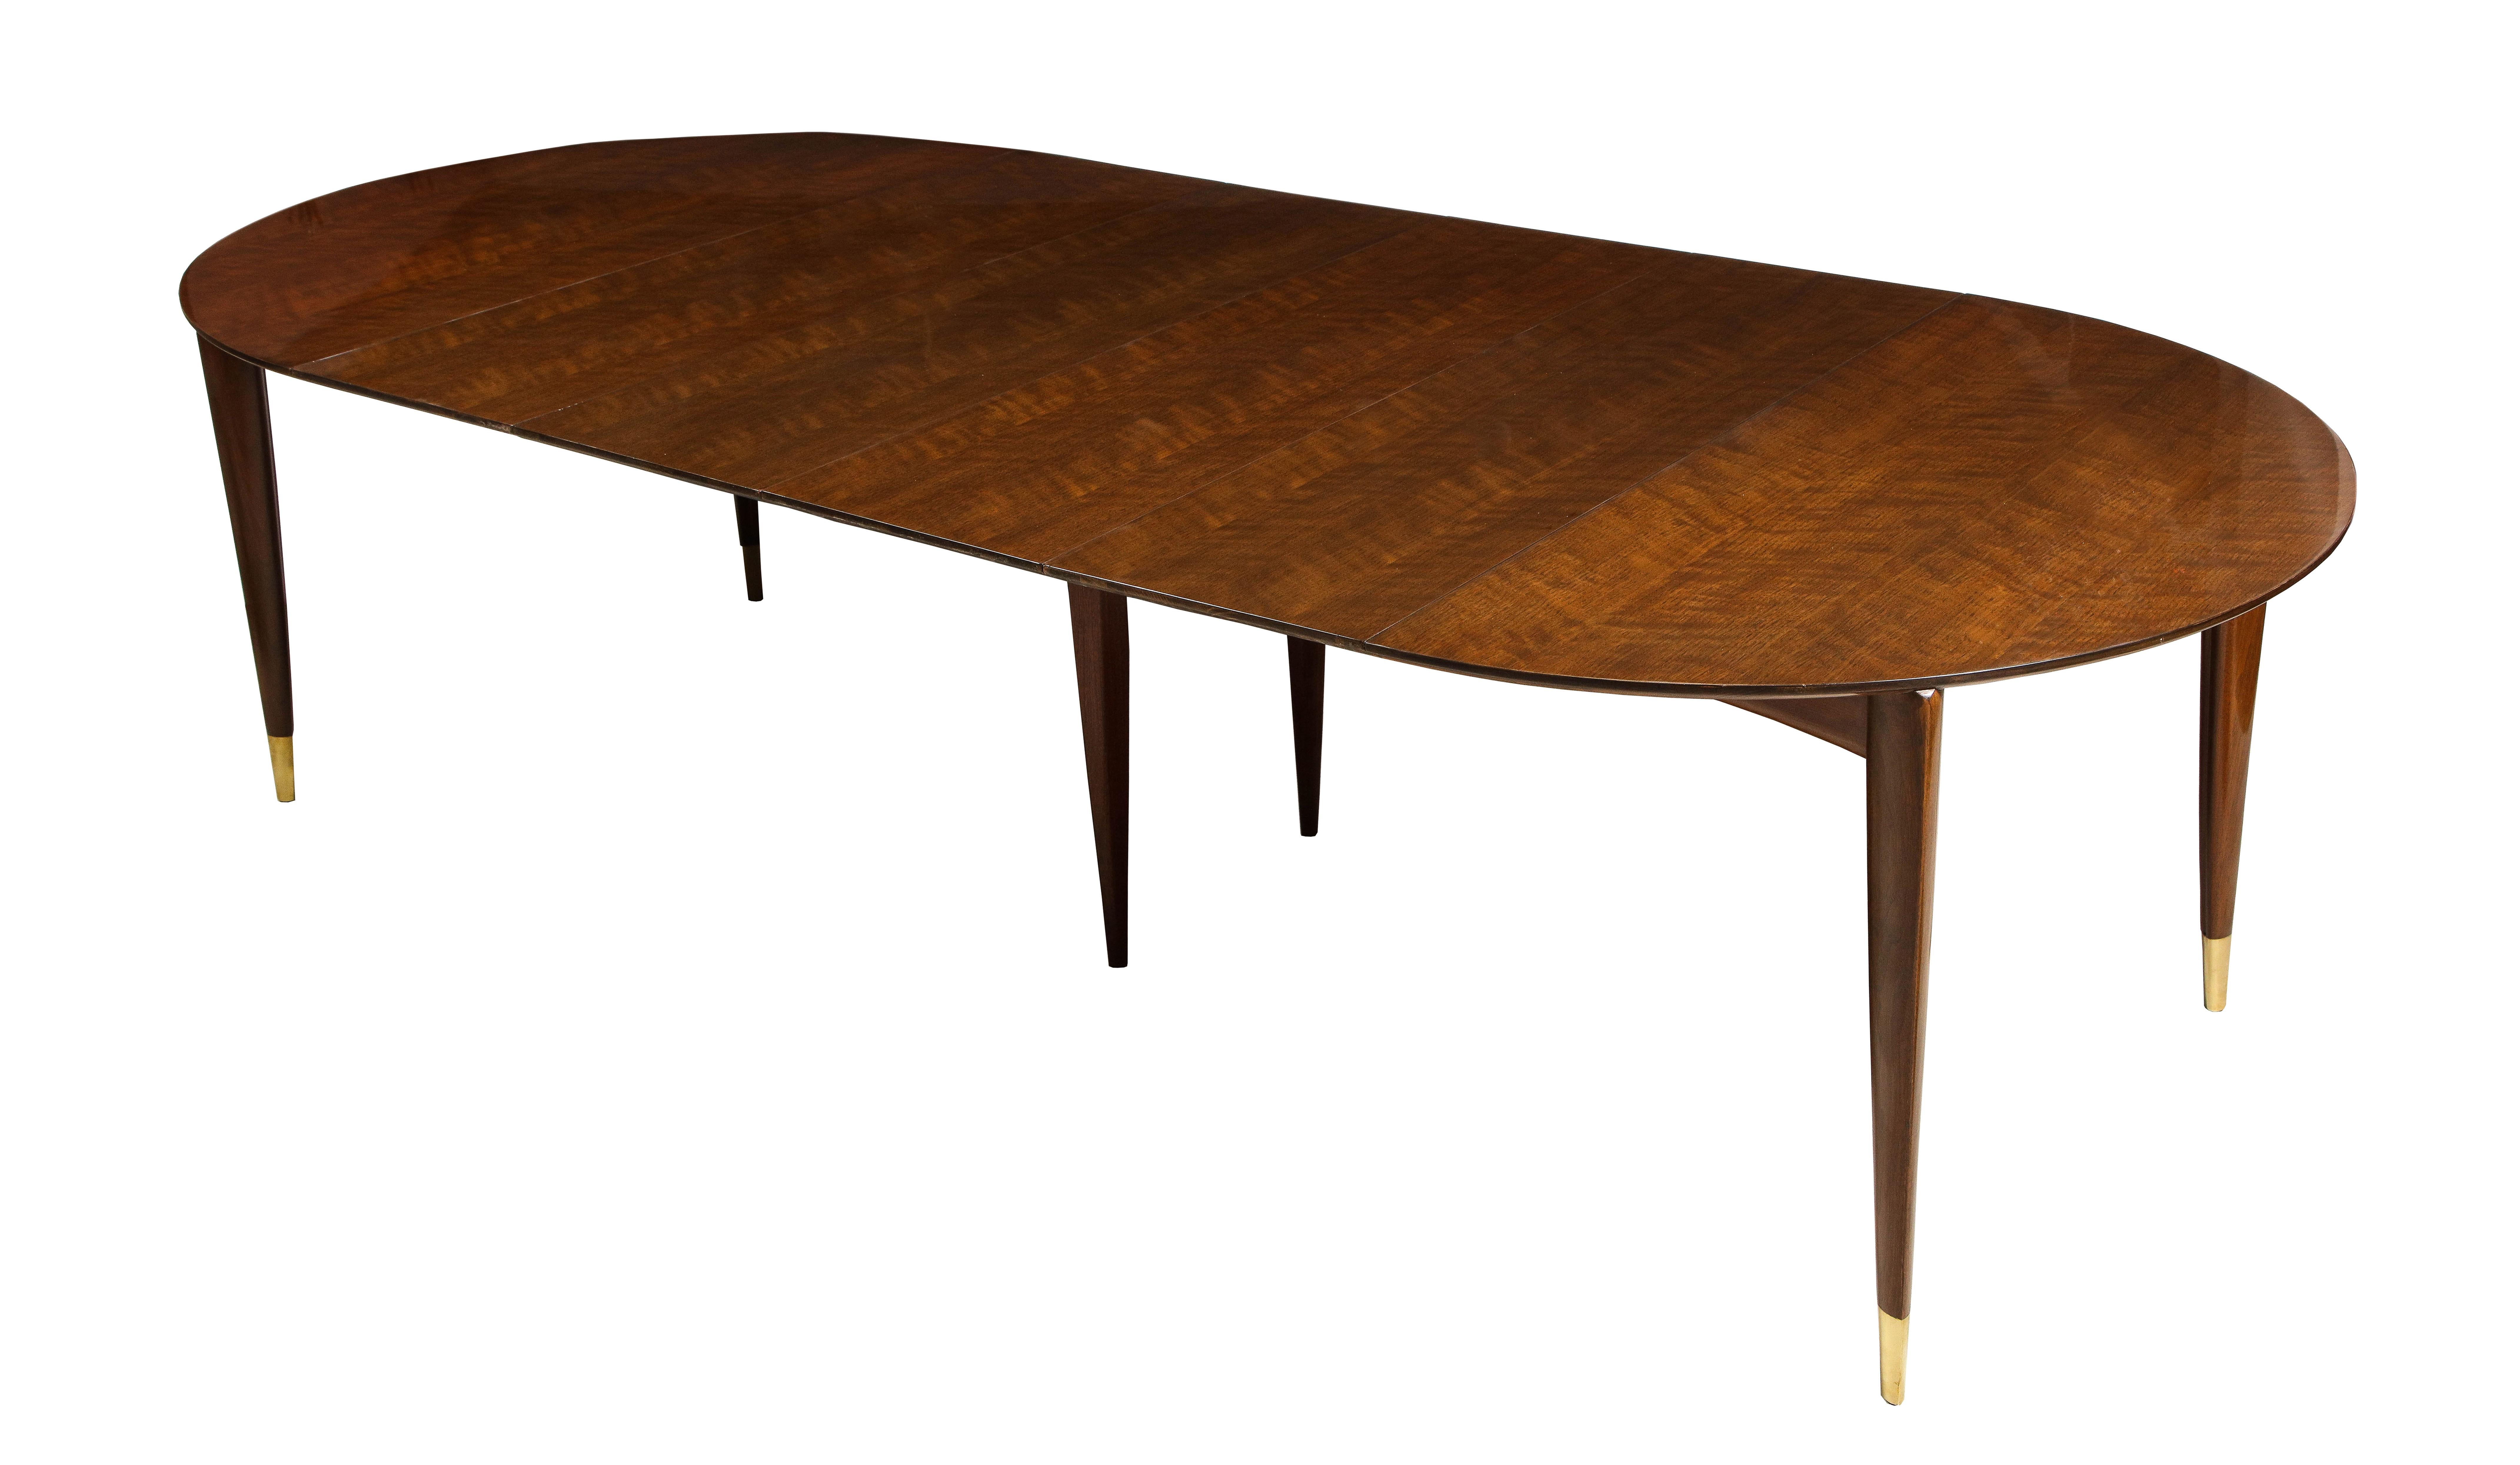 Italian Dining Table by Gio Ponti for M. Singer & Sons